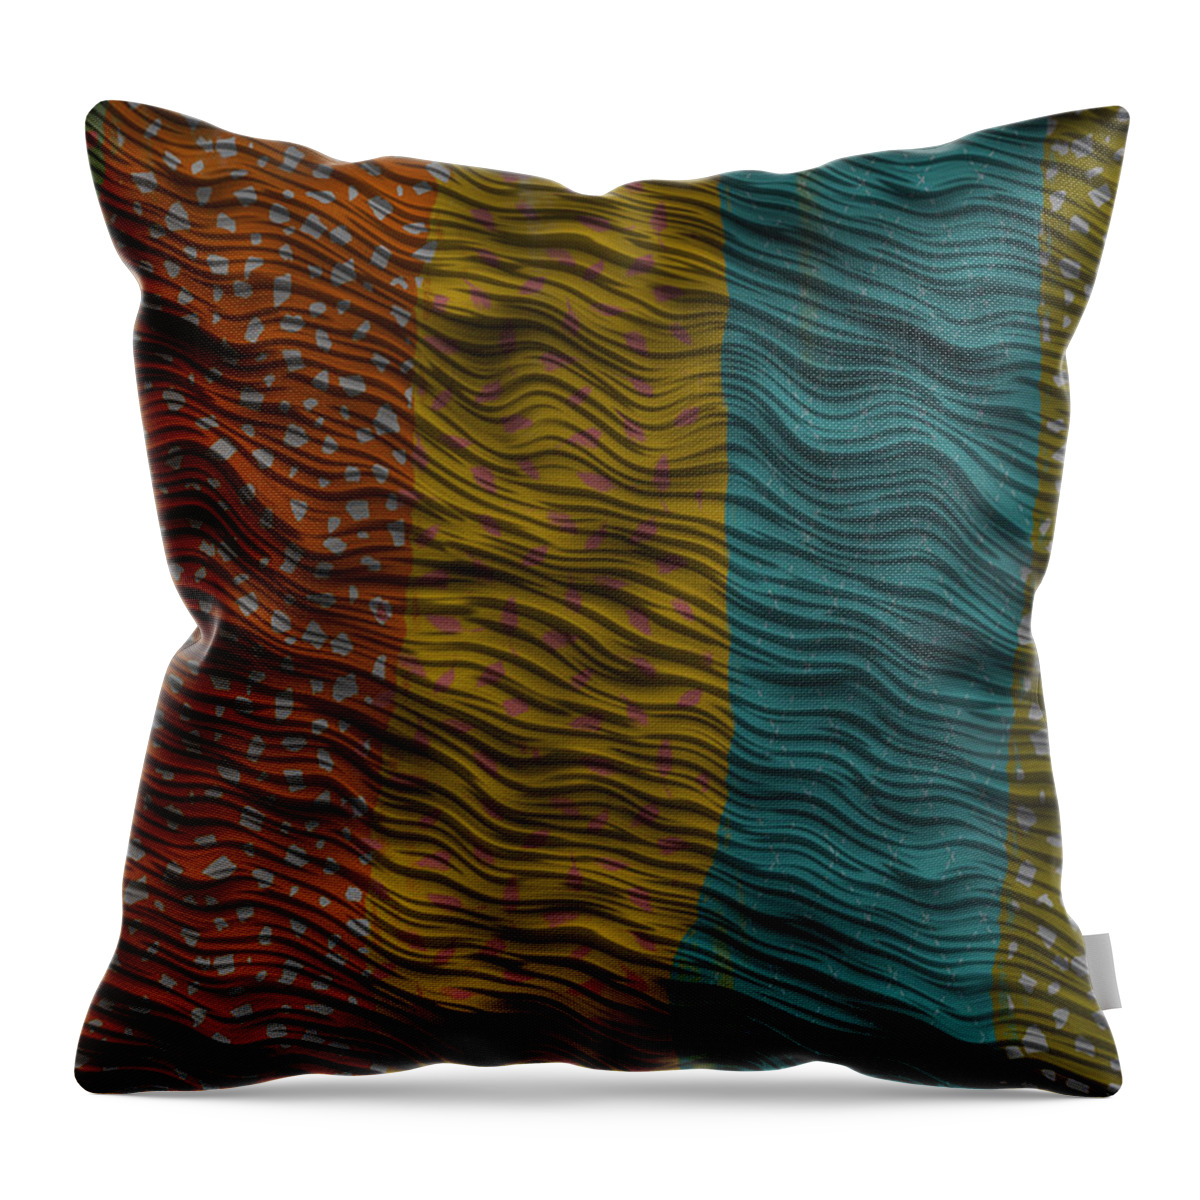 Red Turquoise Sage Throw Pillow featuring the digital art Vertical Patterns by Bonnie Bruno